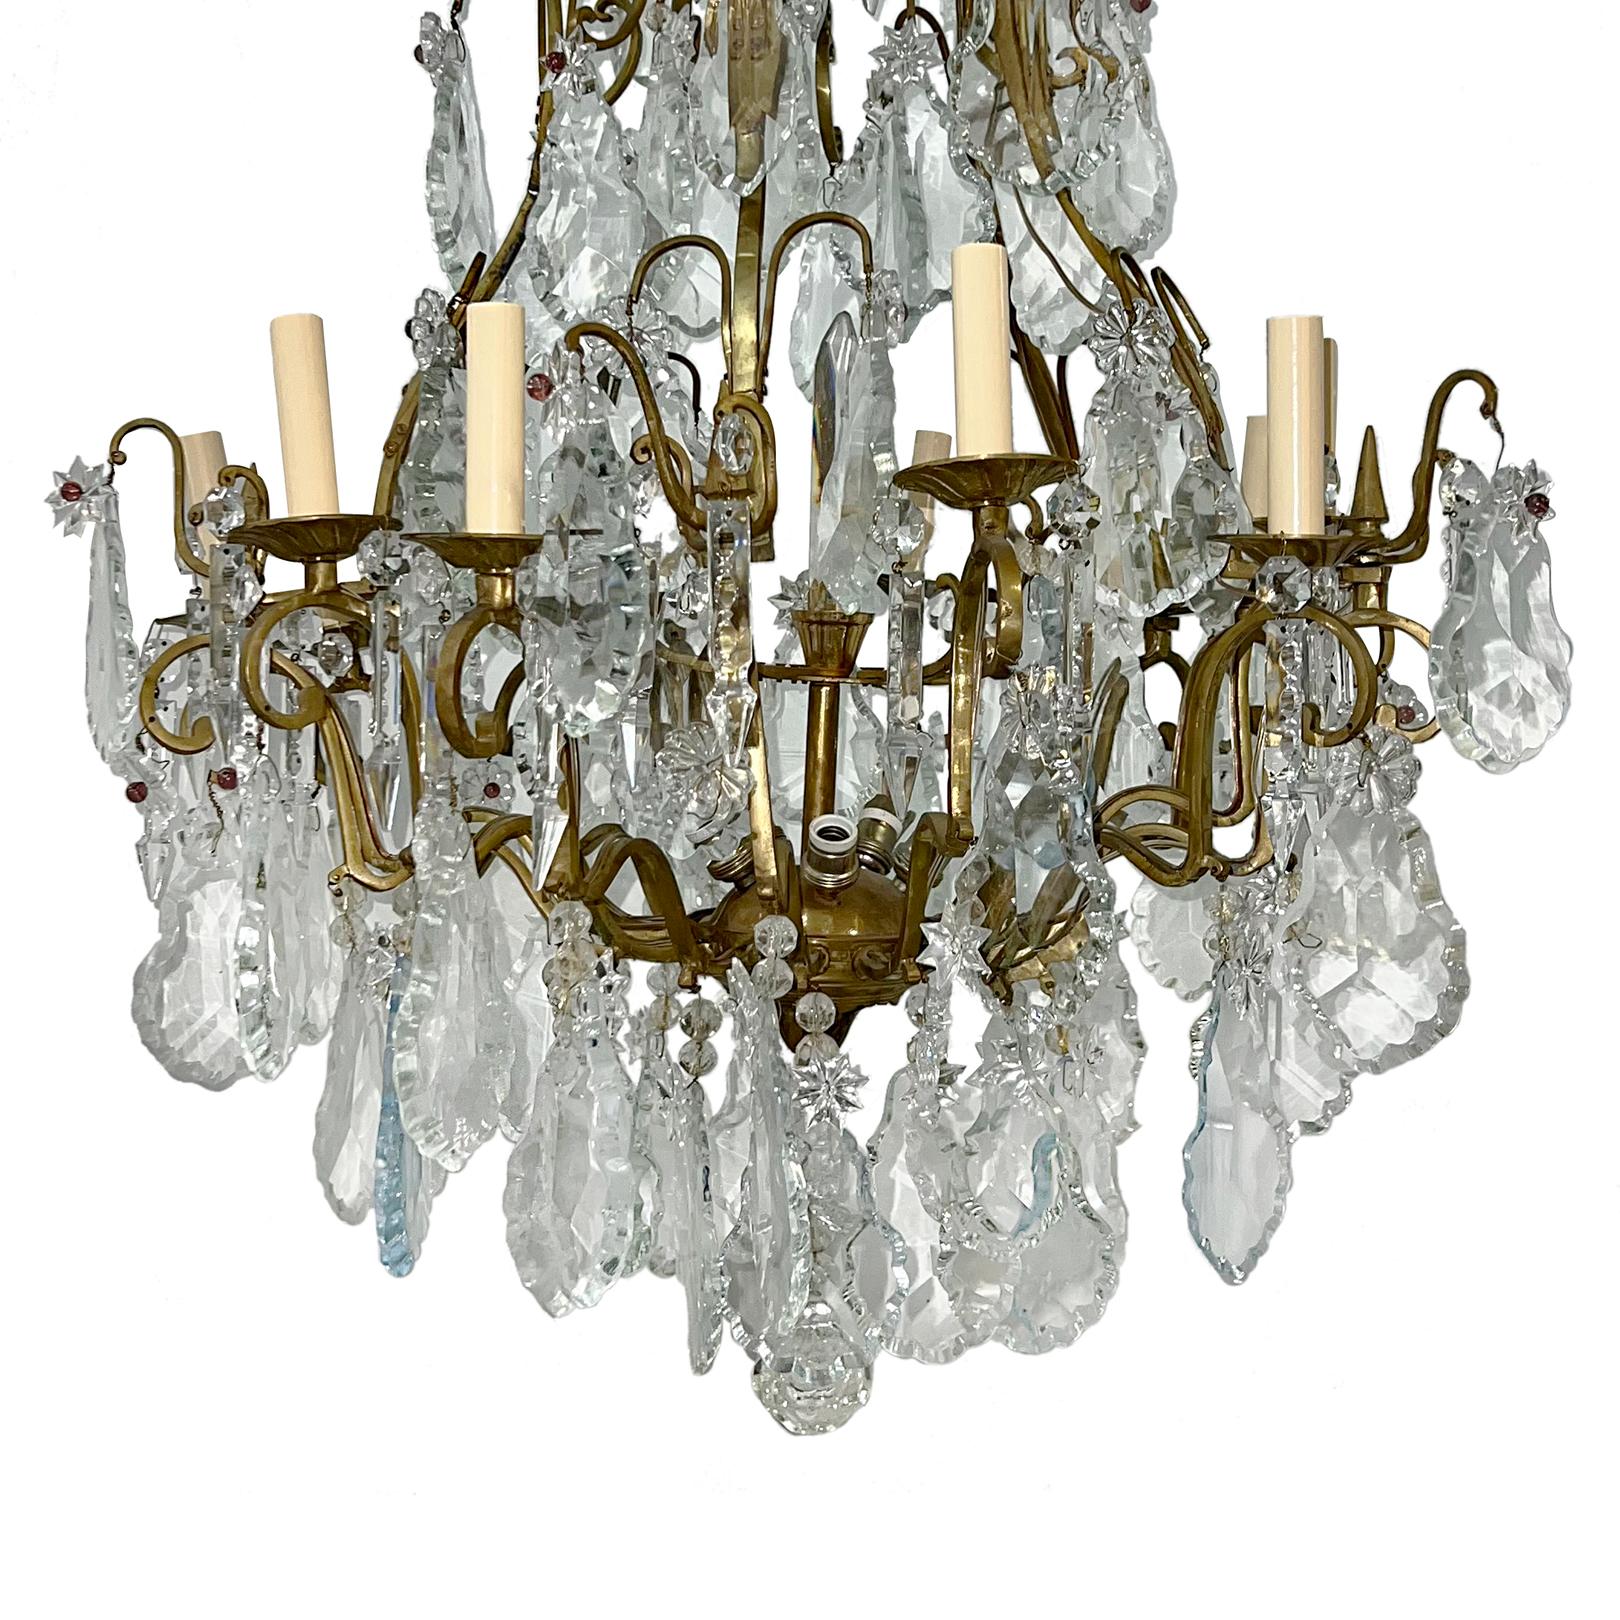 A circa 1900's French chandelier with original patina, 10 lights.

Measurements:
Min drop: 44